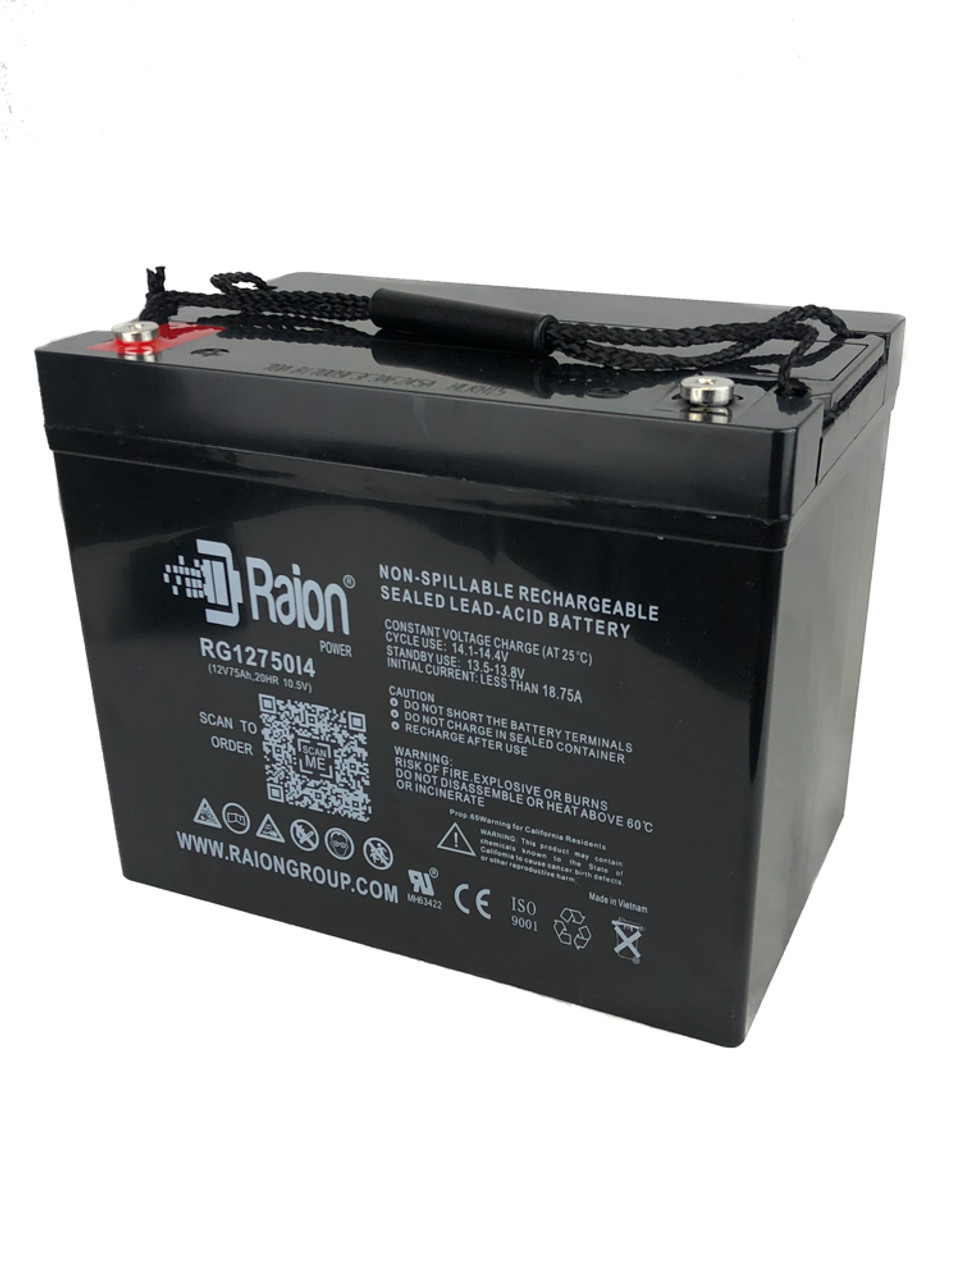 Raion Power Replacement 12V 75Ah Battery for Kaiying KM75-12 - 1 Pack